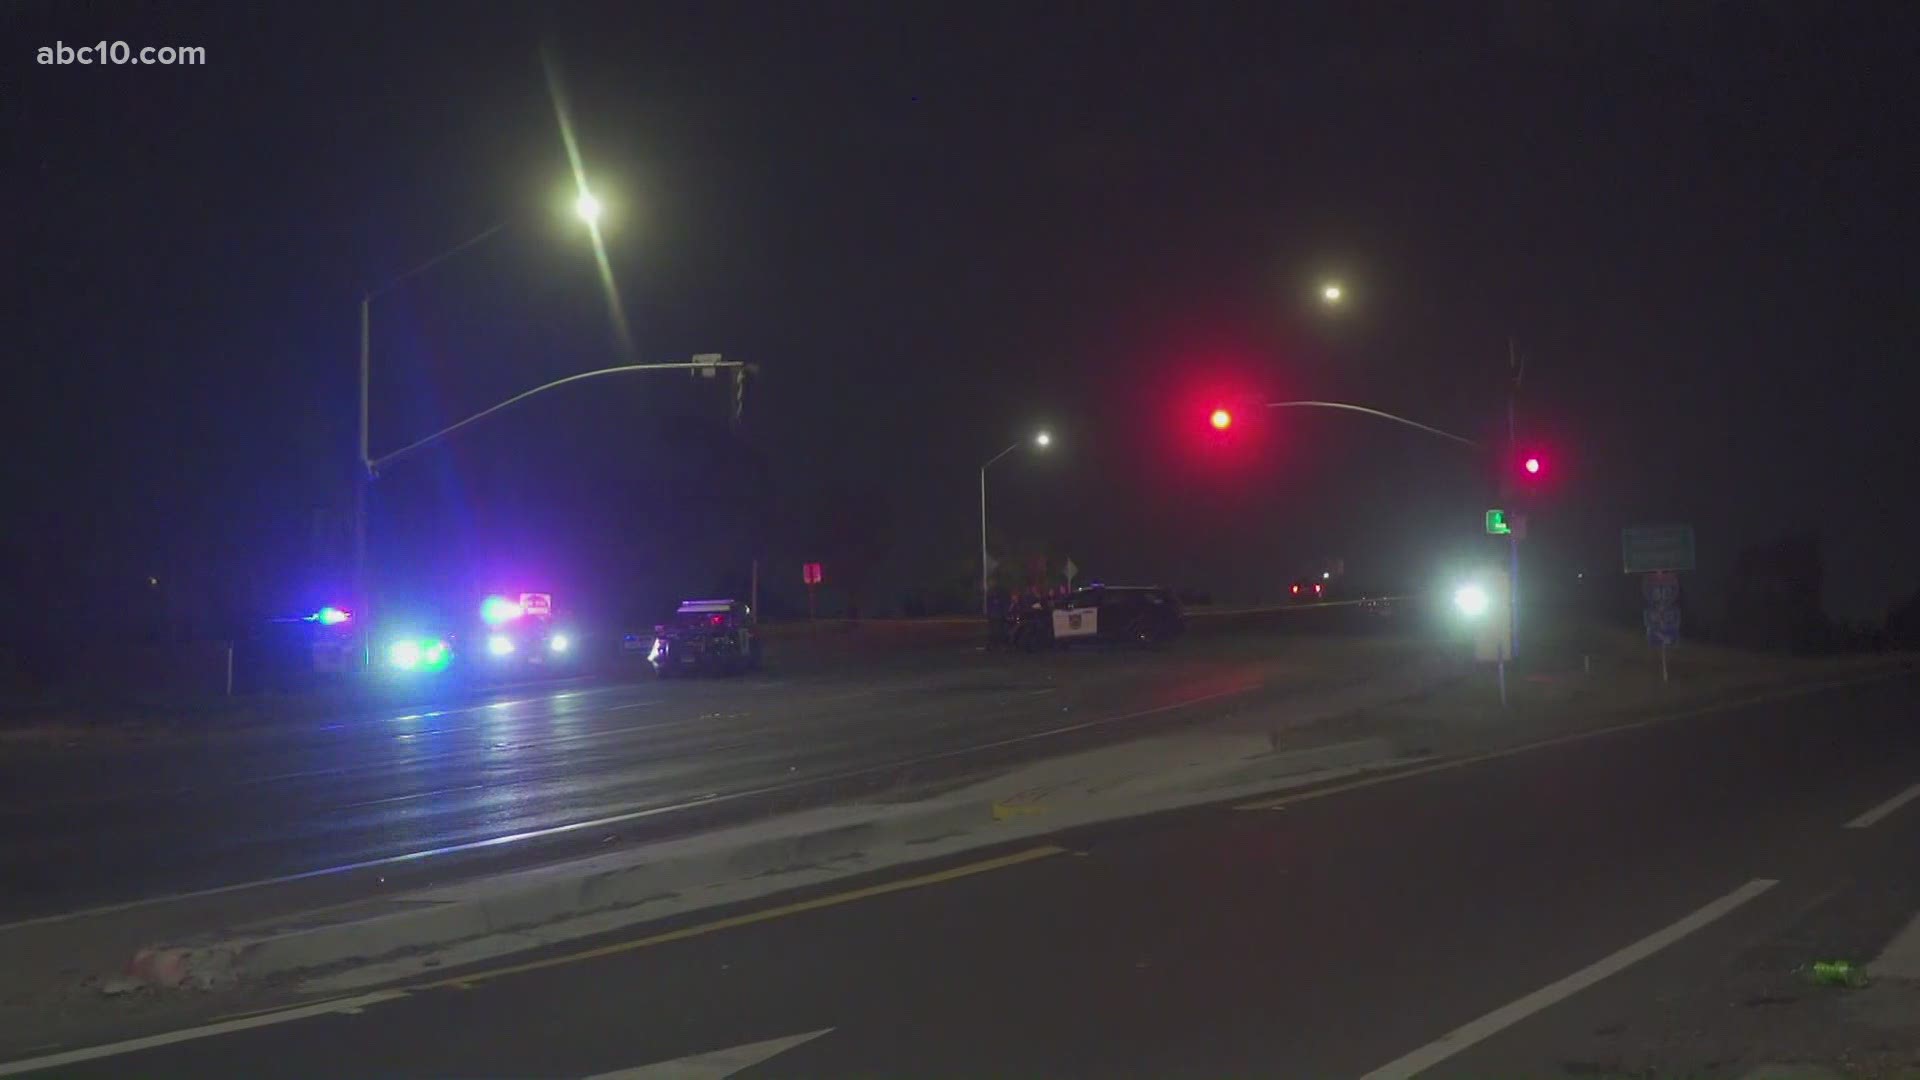 Sacramento Police Department said the crash was between a vehicle and pedestrian.